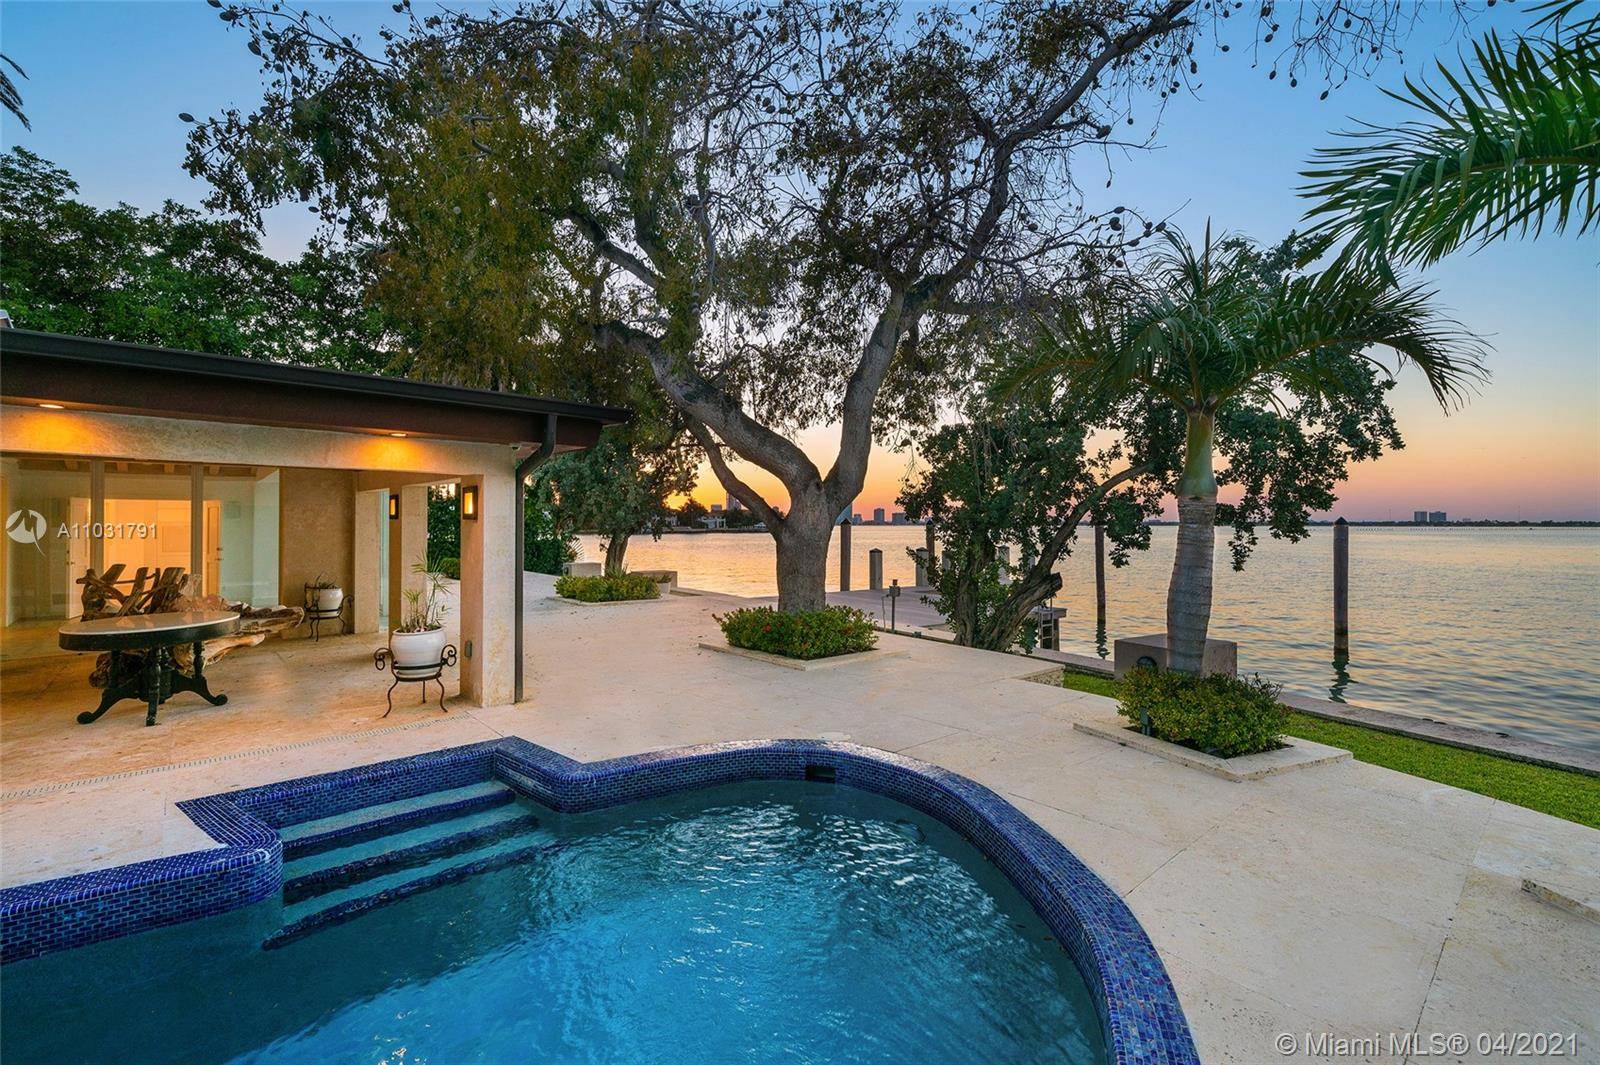 This Bayfront home is perfectly located on the coveted tip of the Venetian Islands.